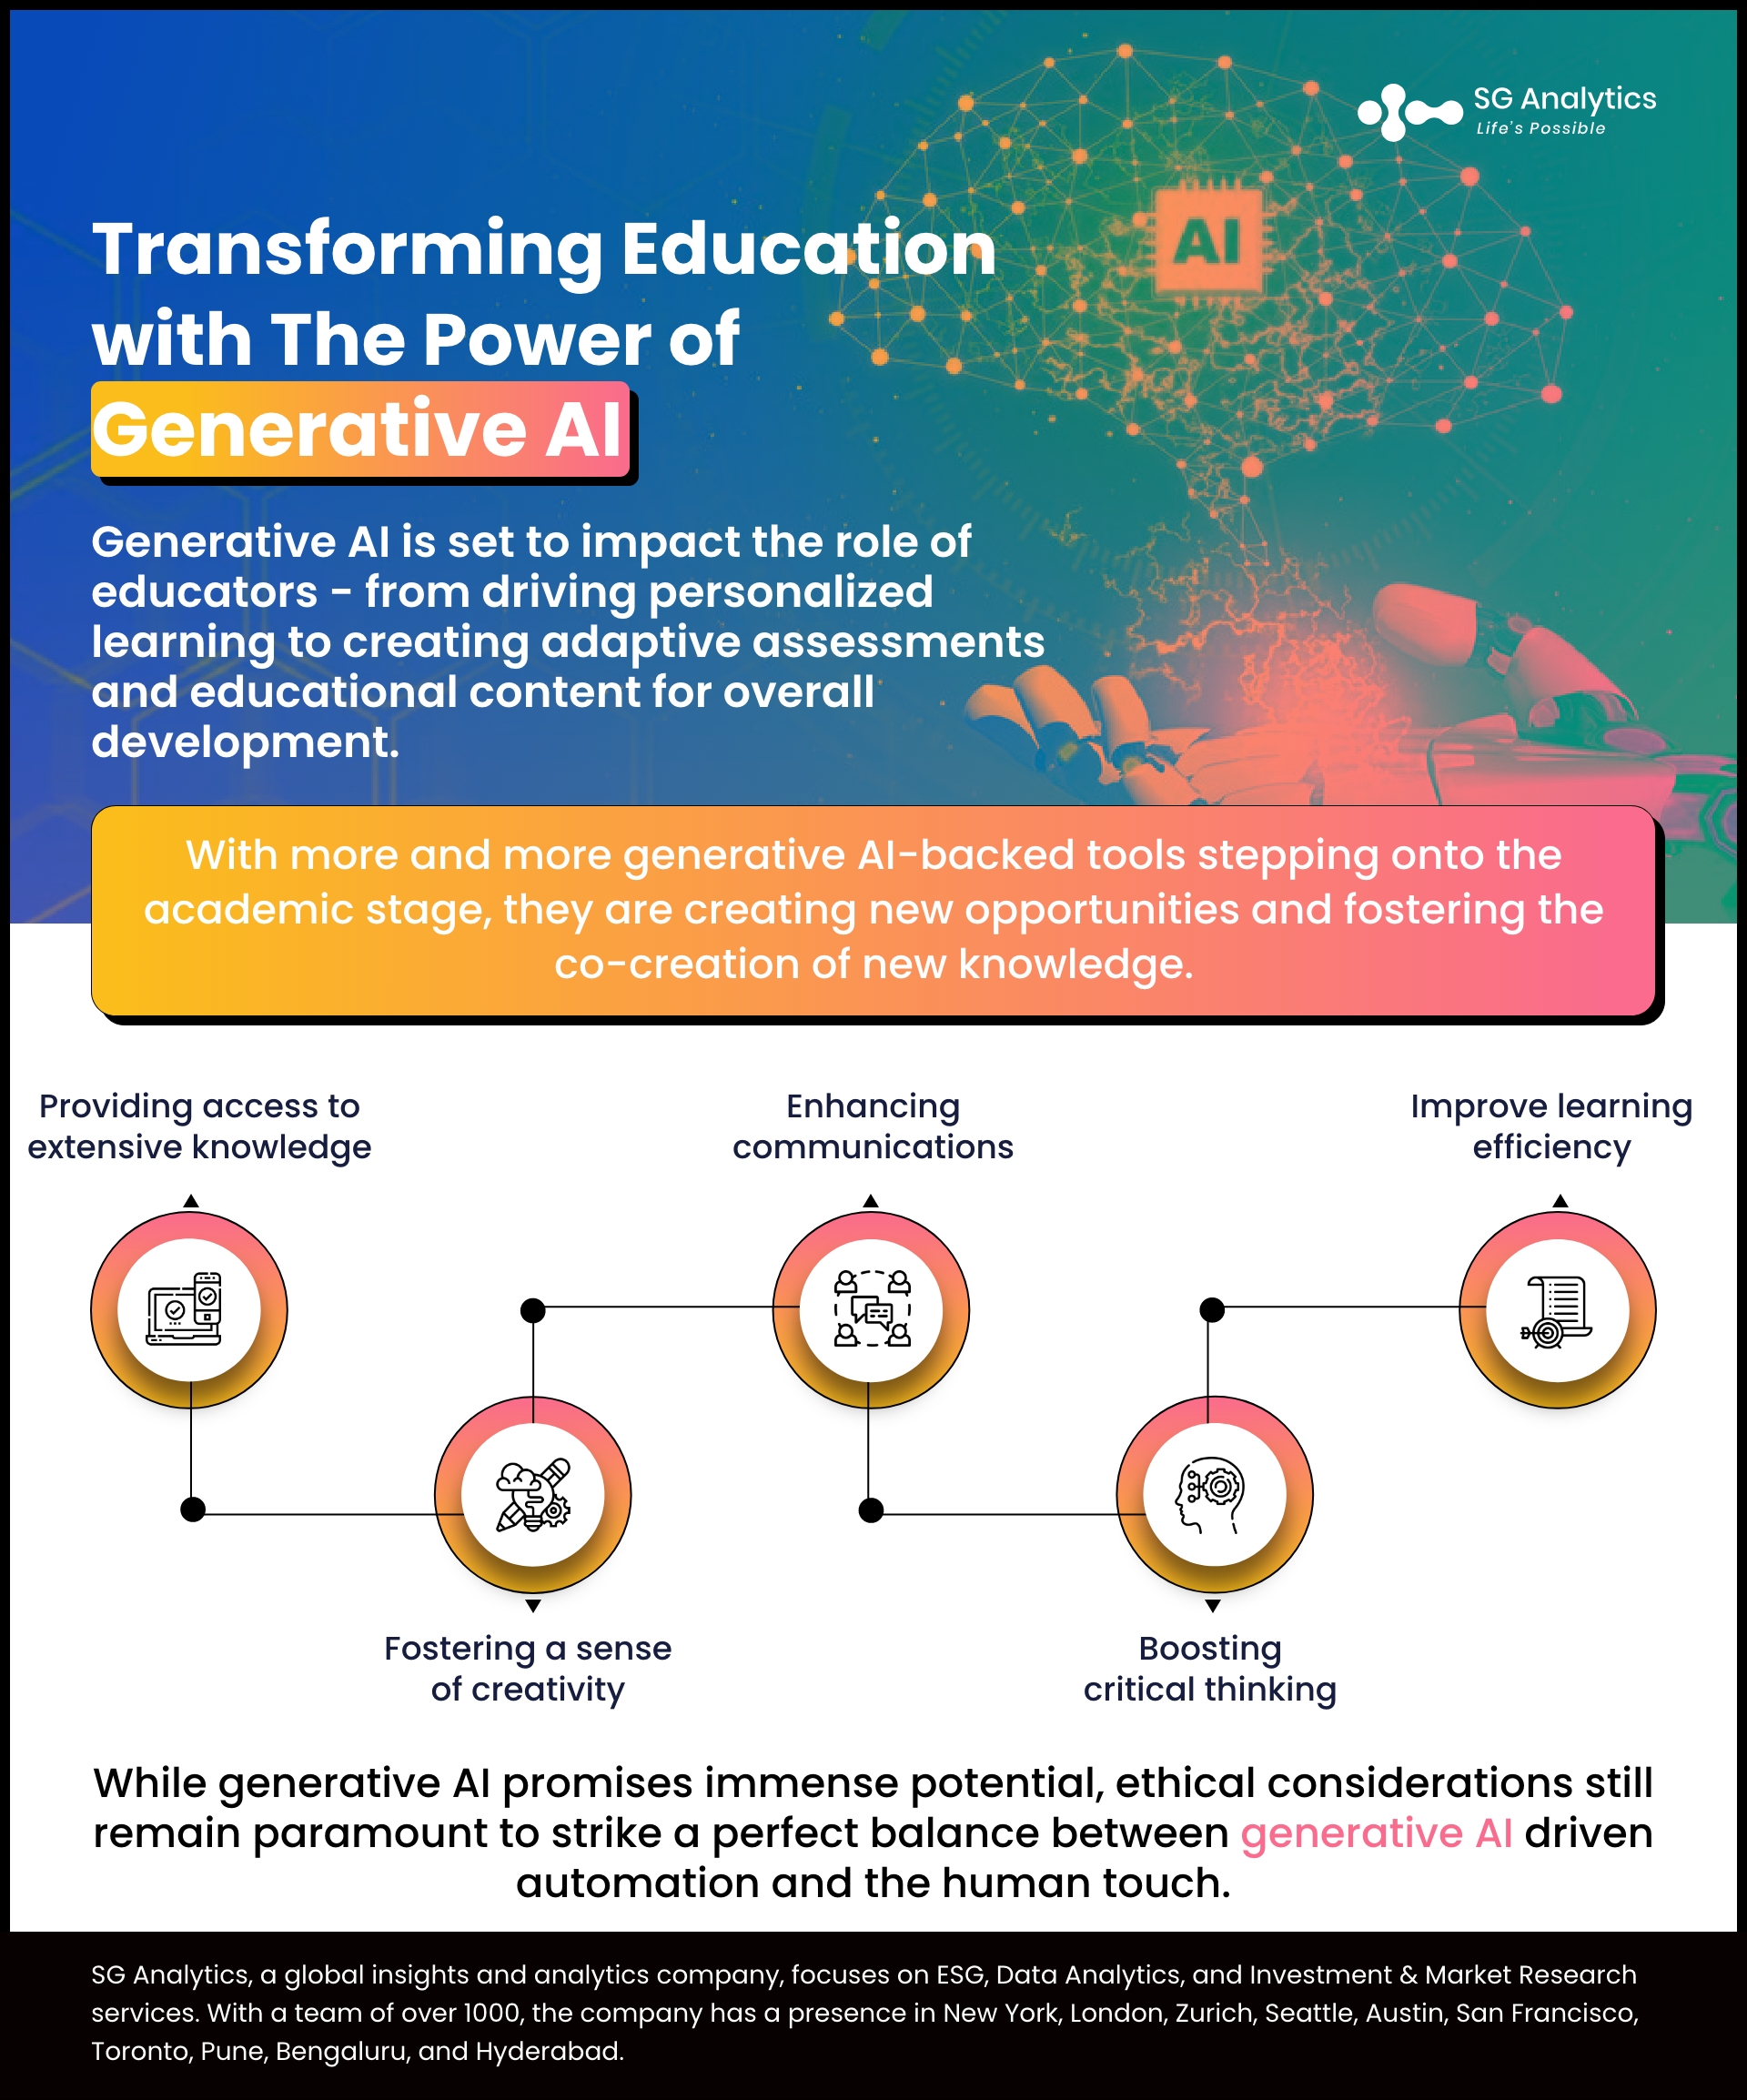 Transforming Education with The Power of Generative AI